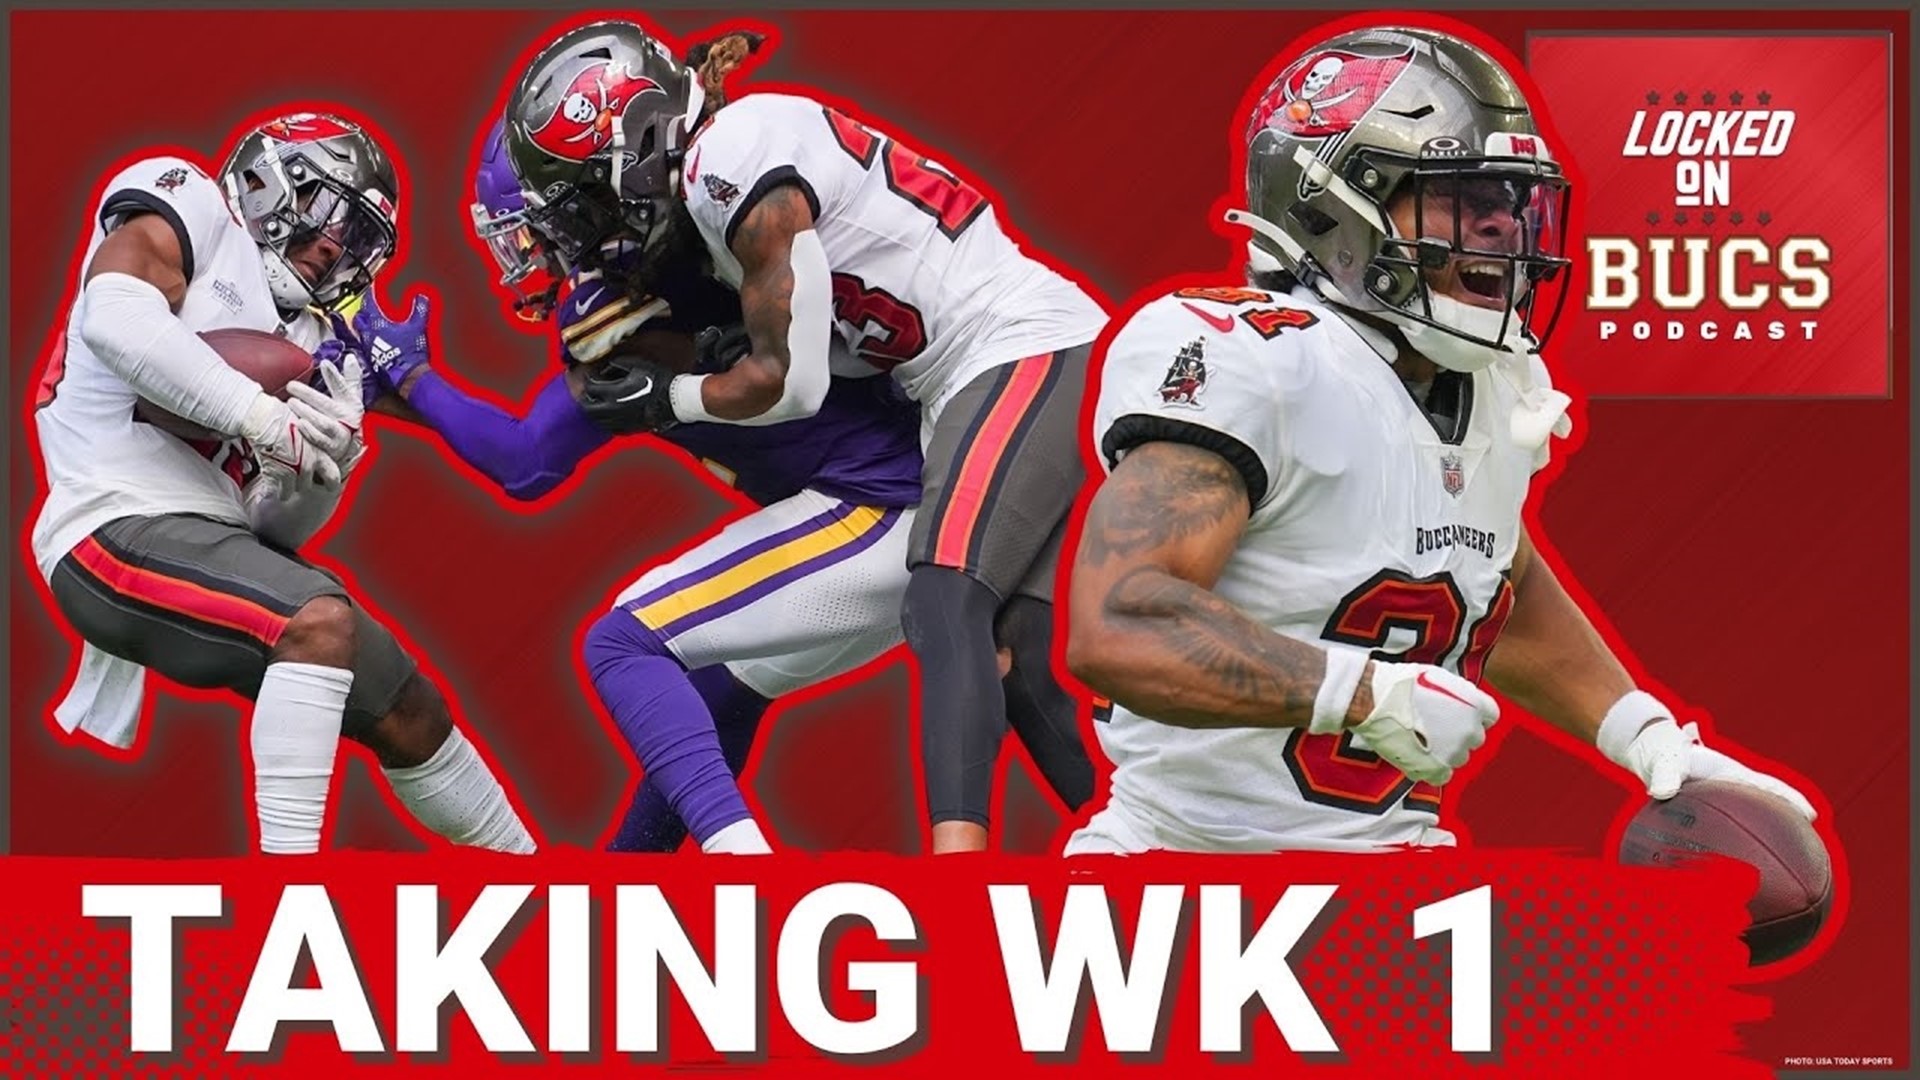 The Tampa Bay Buccaneers defeated the Minnesota Vikings - no matter what some may say or have predicted.